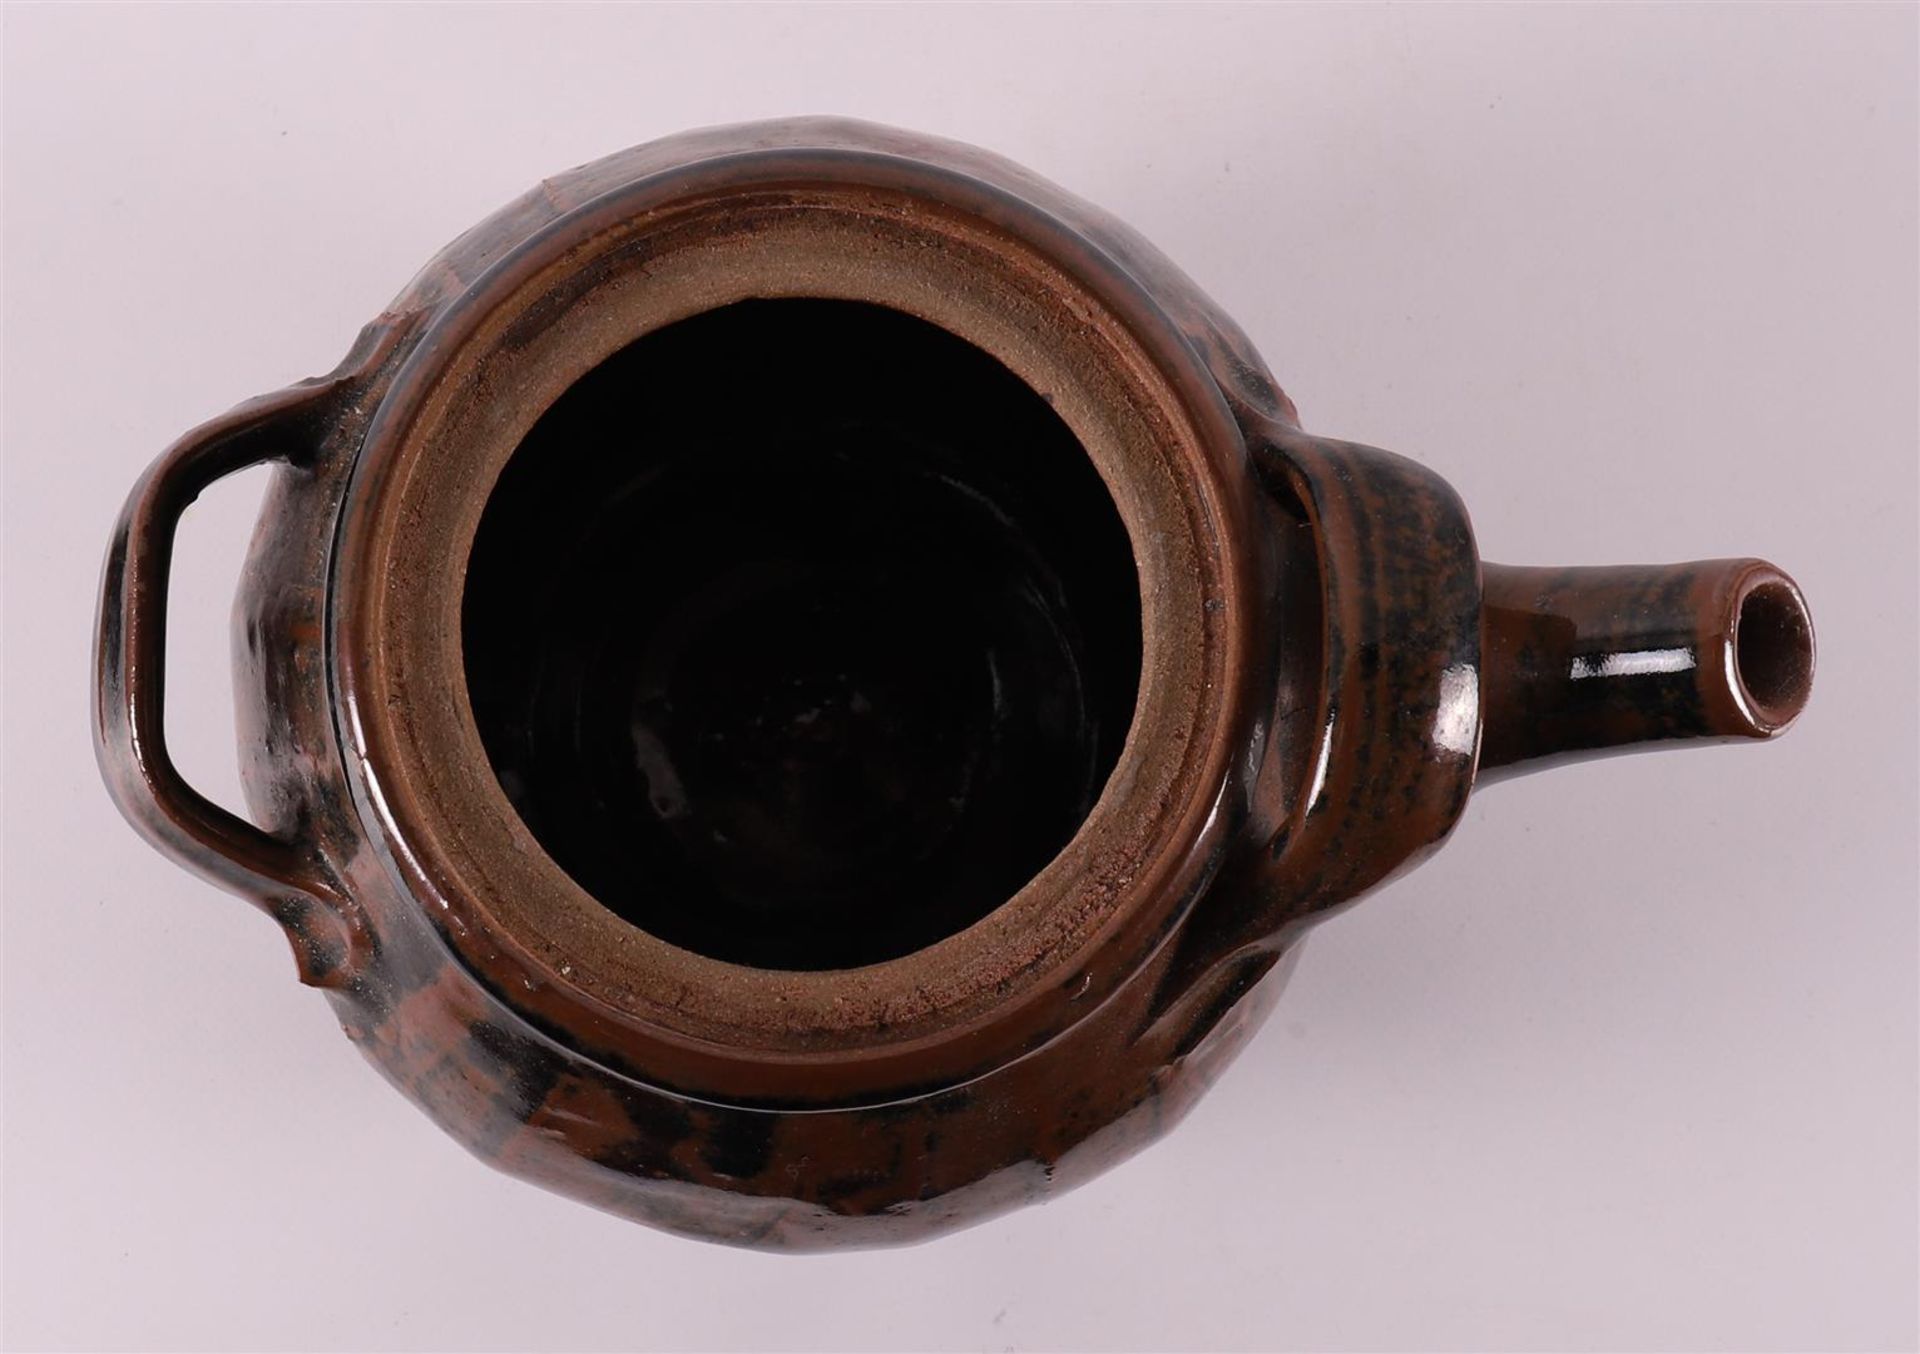 A brown glazed ceramic teapot, 2nd half of the 20th century. - Image 5 of 8